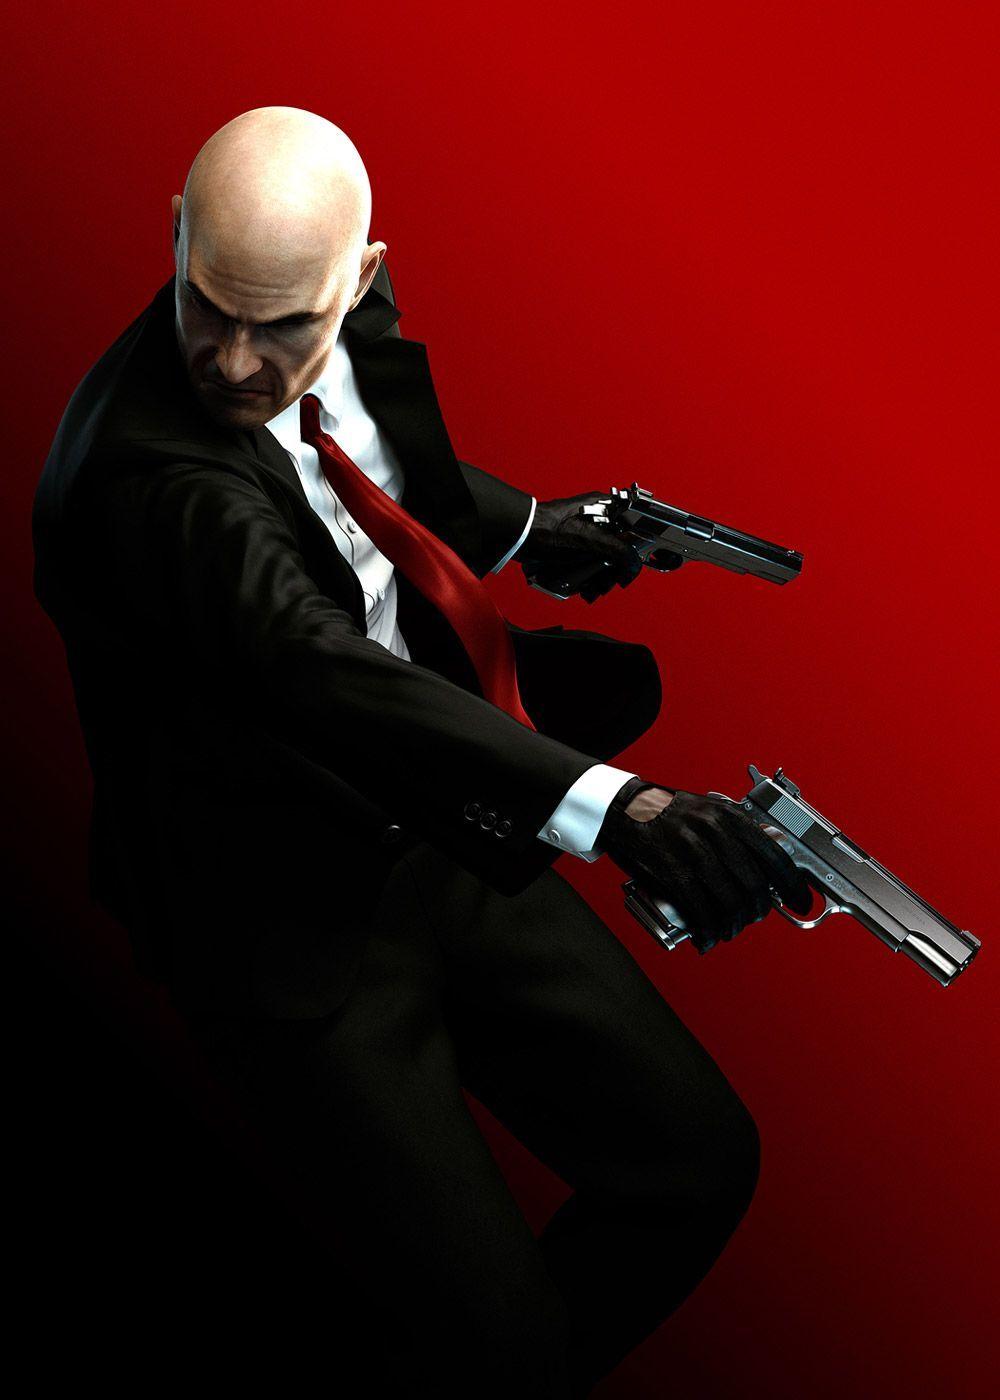 Agent 47 Iphone Wallpapers Top Free Agent 47 Iphone Backgrounds Wallpaperaccess